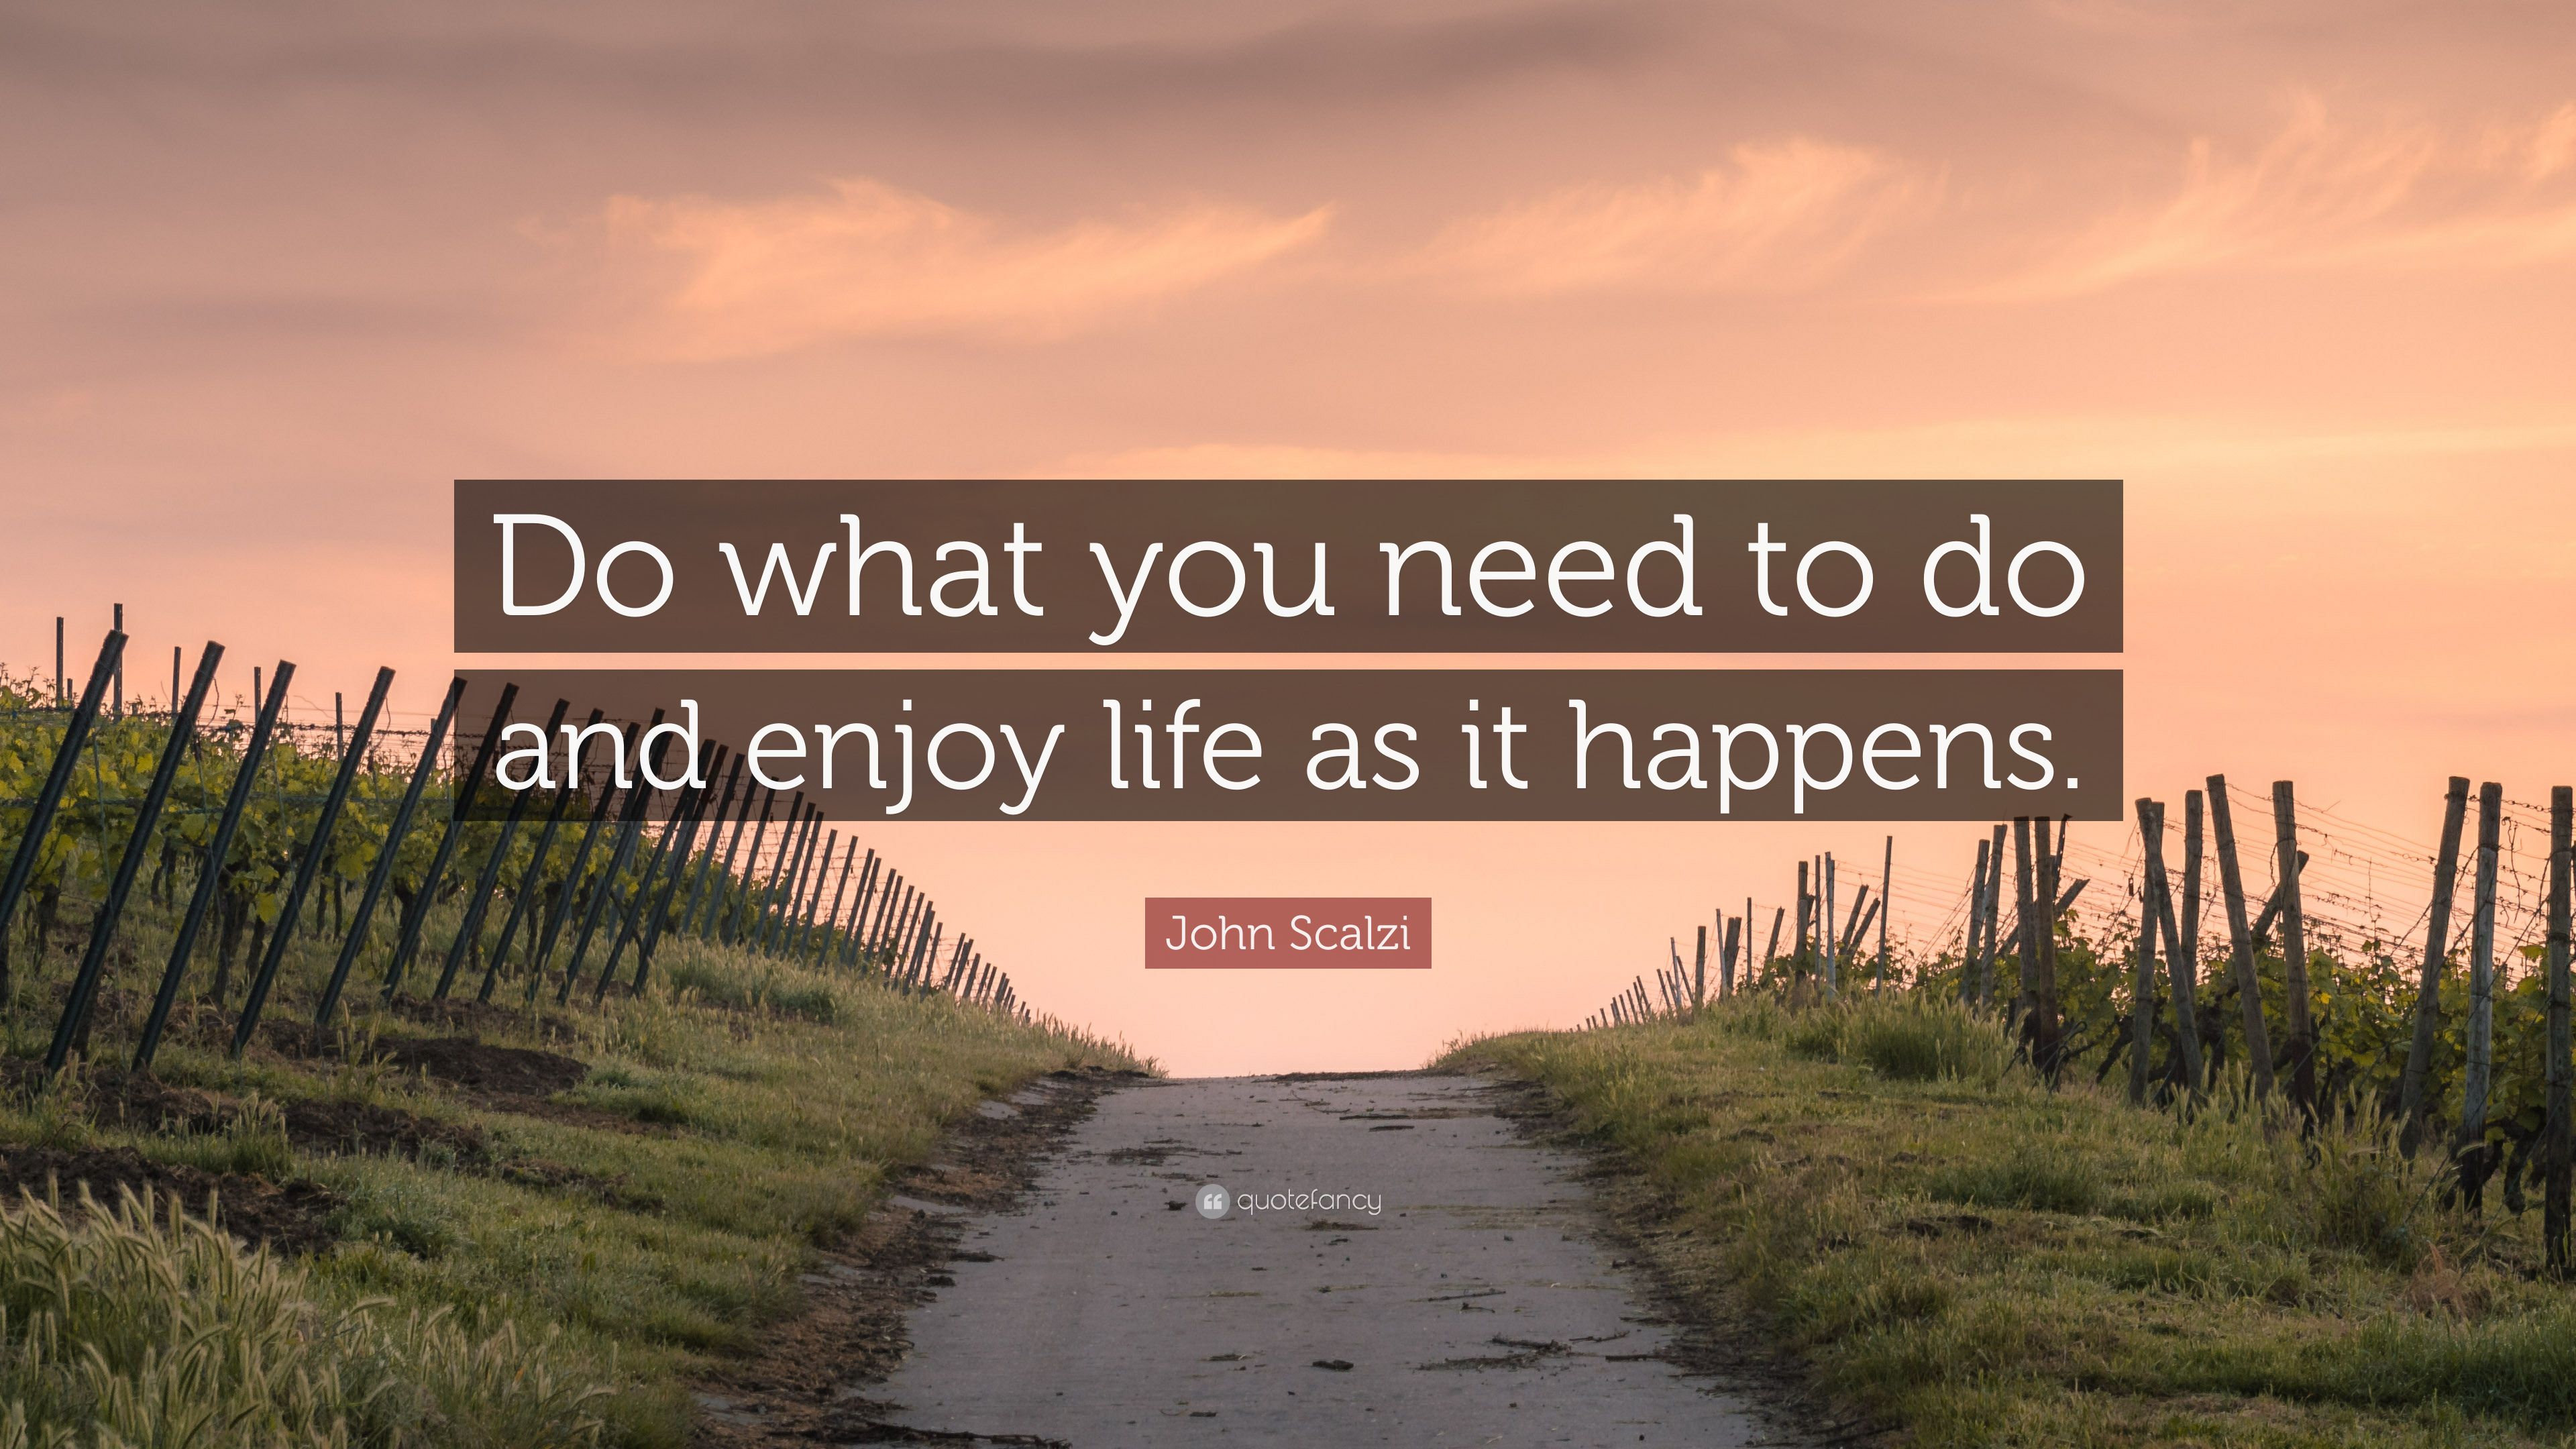 John Scalzi Quote: “Do what you need to do and enjoy life as it happens.” (7 wallpaper)